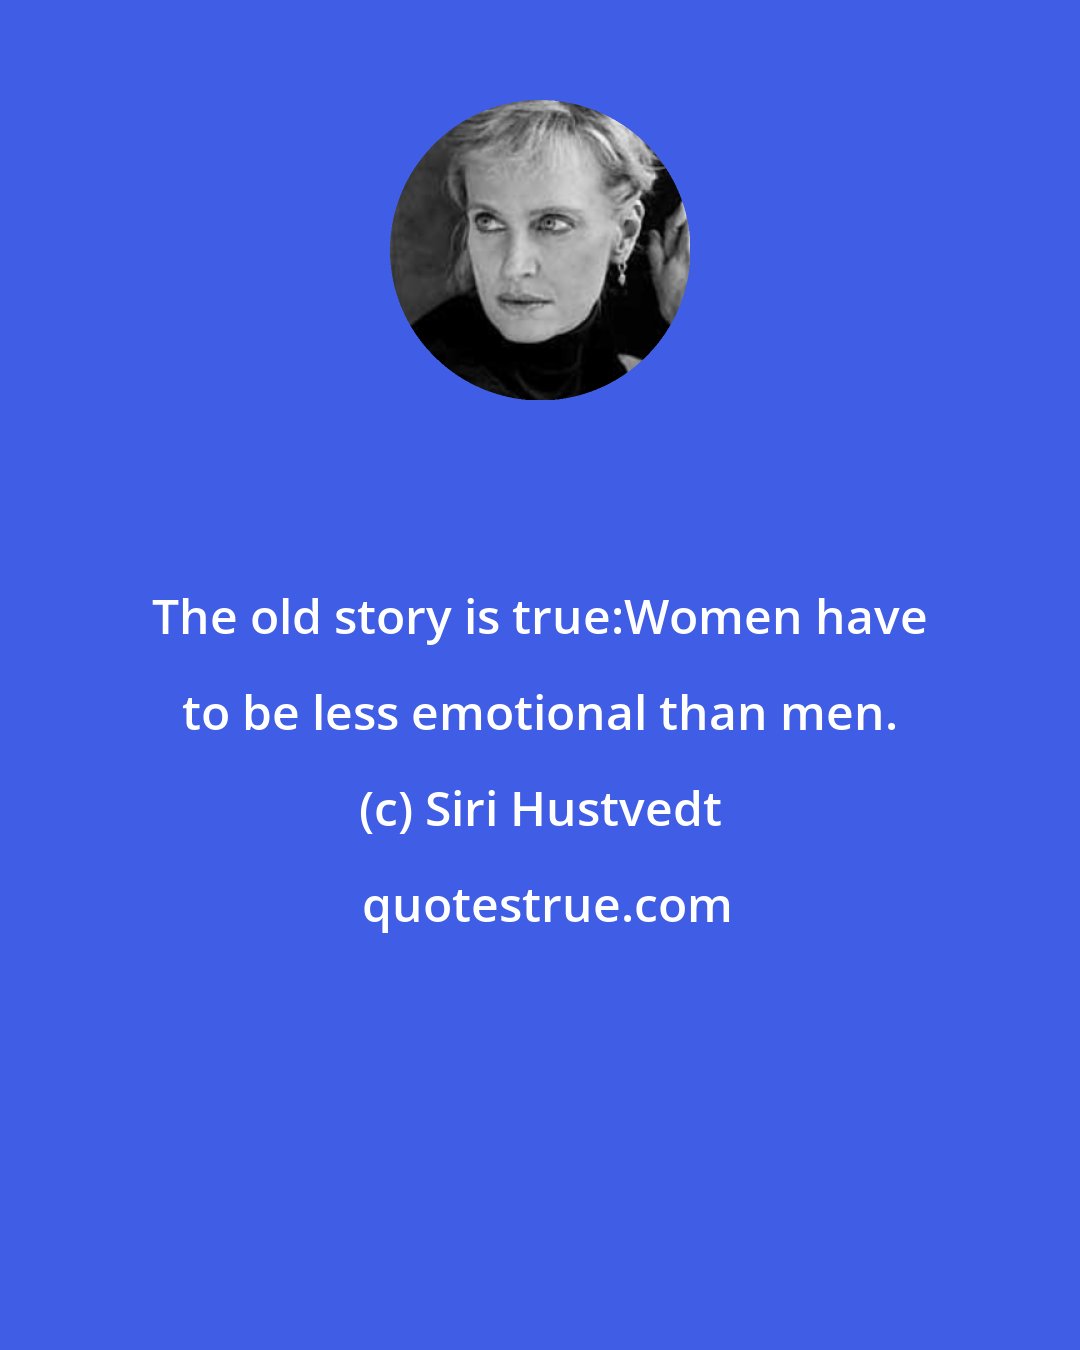 Siri Hustvedt: The old story is true:Women have to be less emotional than men.